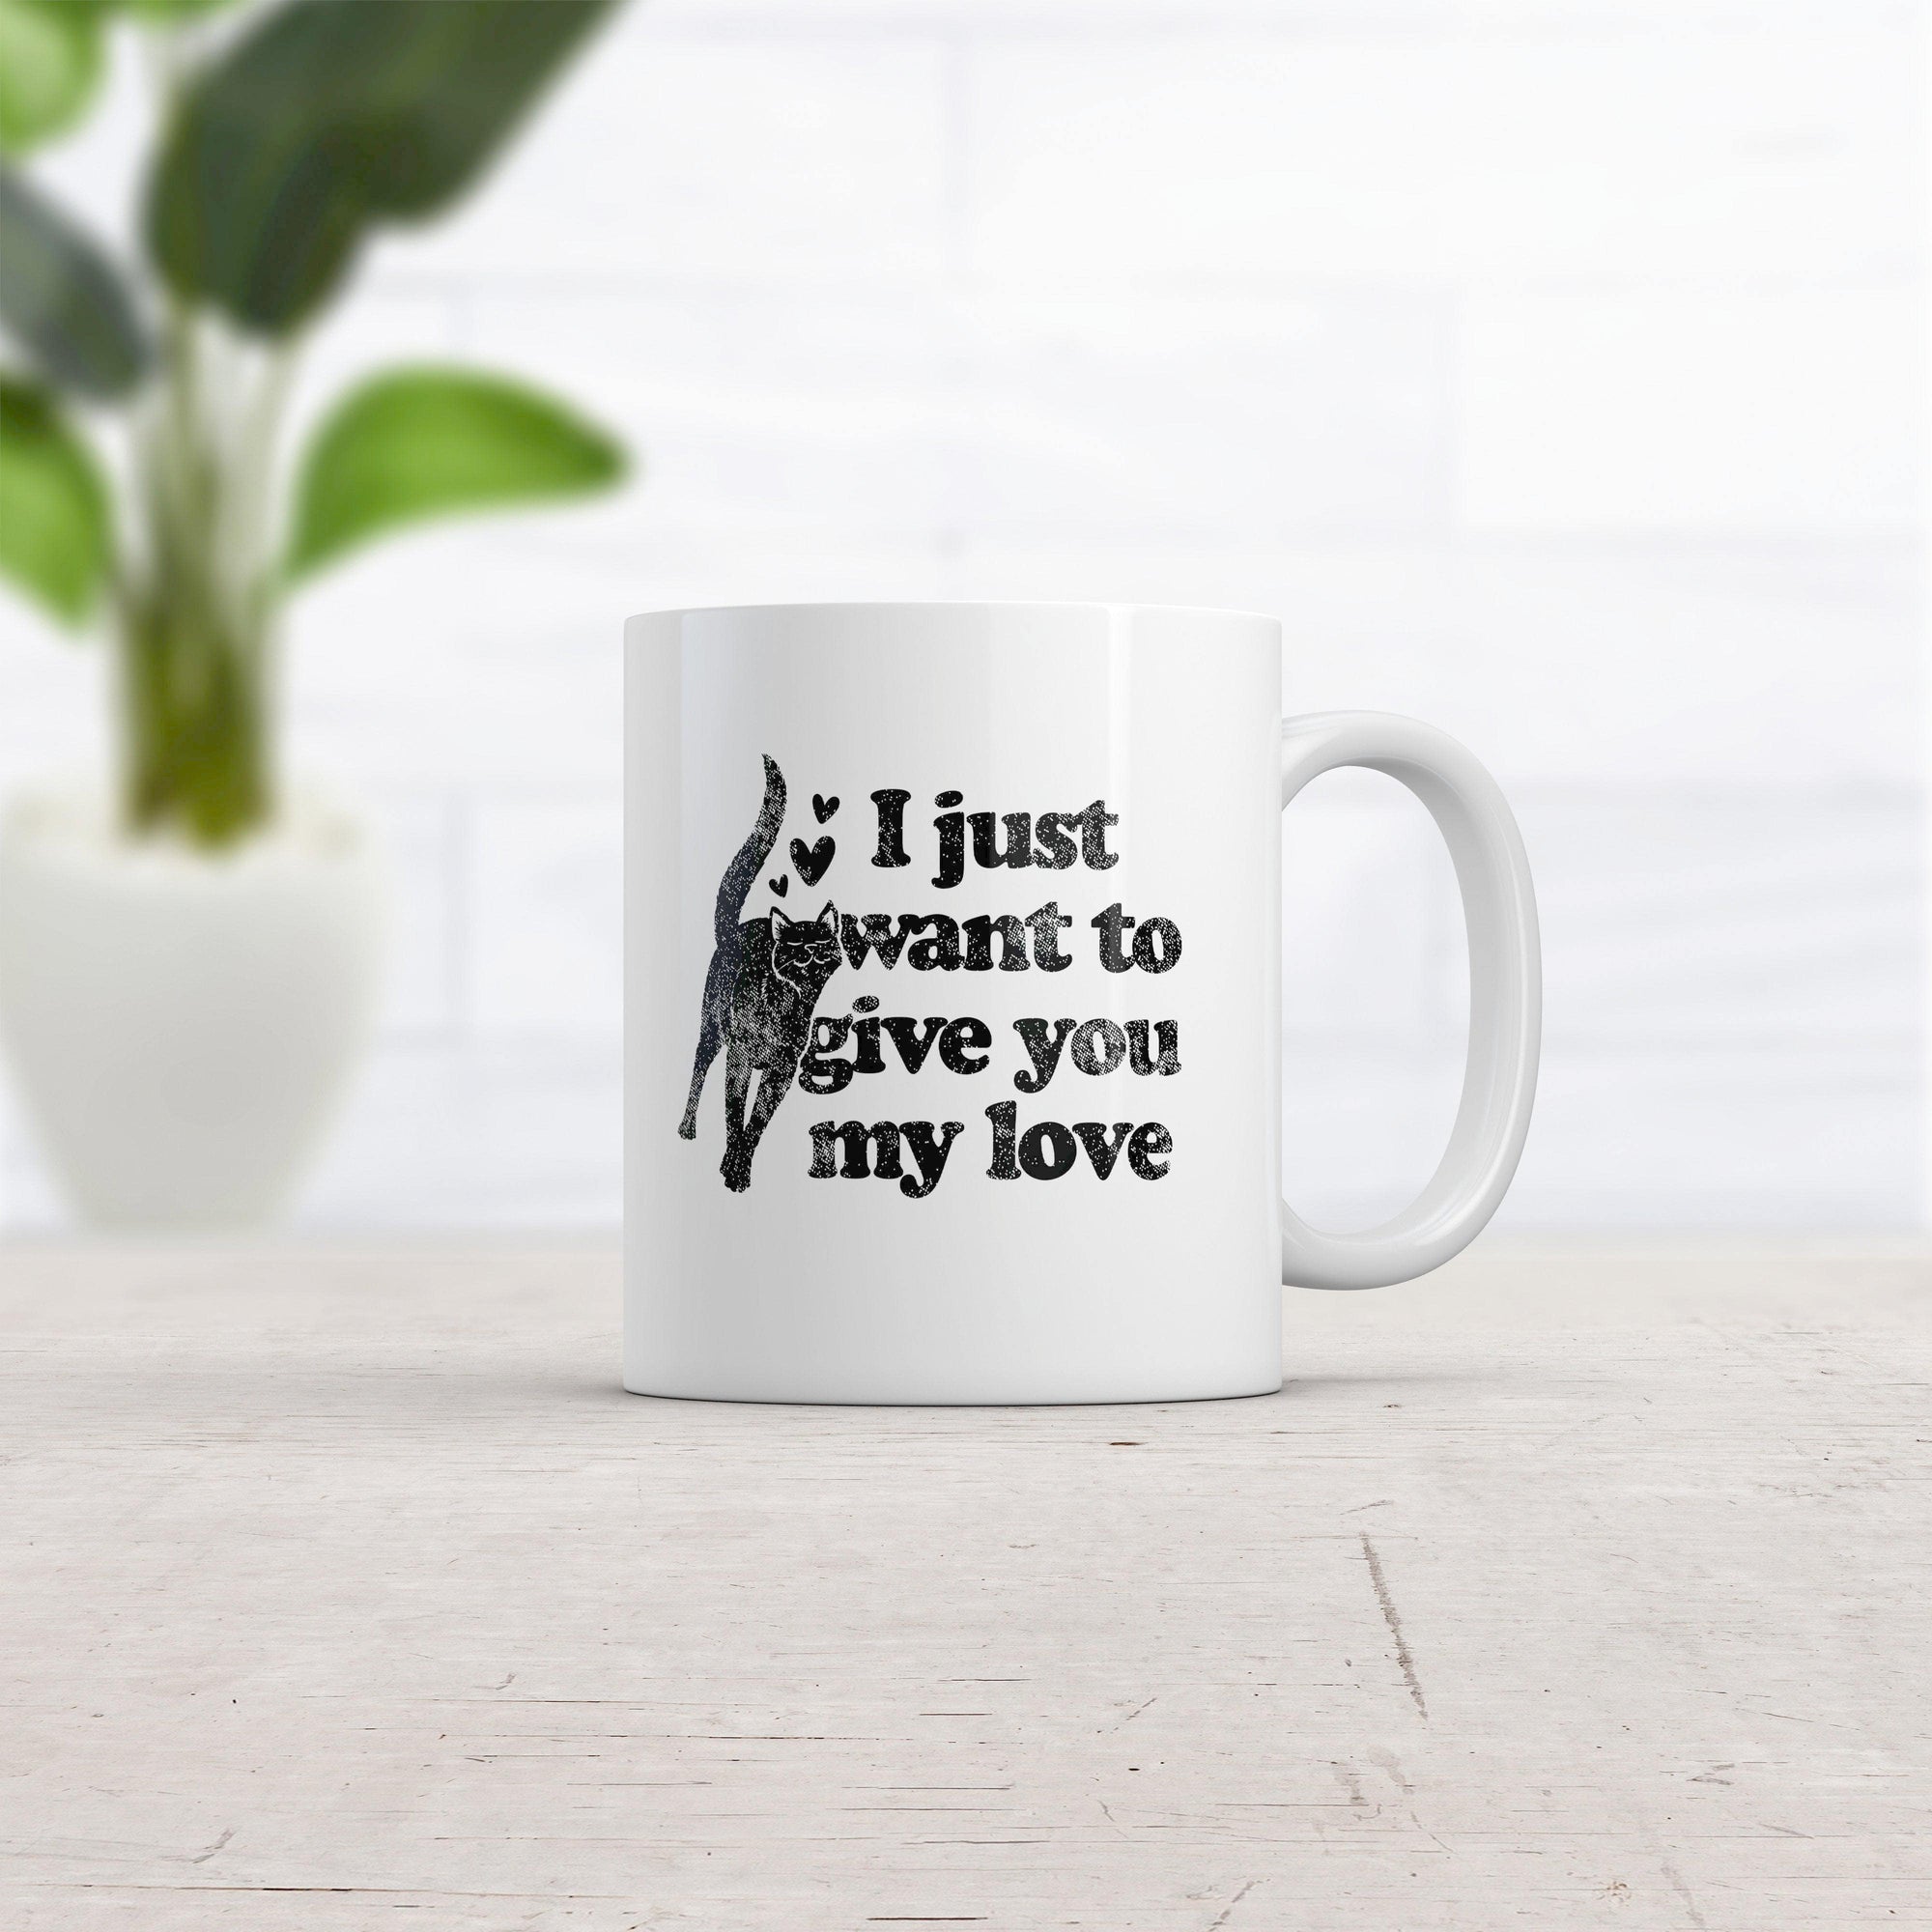 I Just Want To Give You My Love Cat Mug Funny Kitten Rubs Graphic Novelty Coffee Cup-11oz  -  Crazy Dog T-Shirts